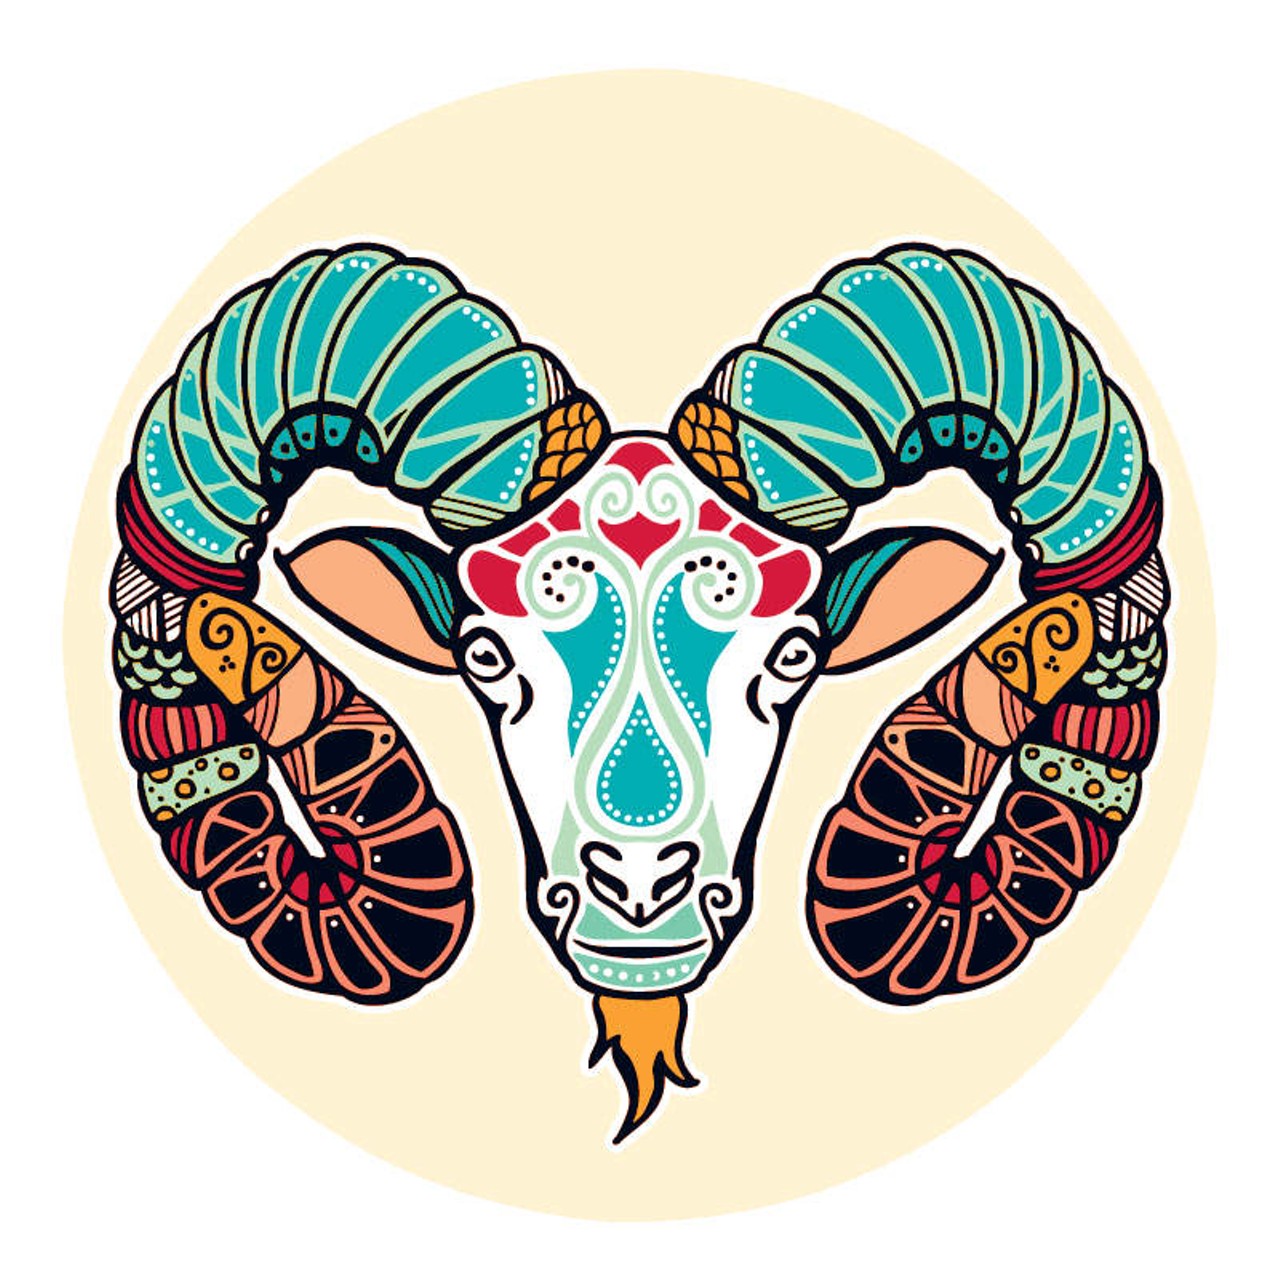 ARIES: March 21 &#150; April 20
You are always free to do what you want; it's the way things are with you. At the moment, doing what you want involves bringing the long awaited dream to life. In the last few weeks you have woken up to the fact that there is no way you can bring things to fulfillment without coming to terms with your fears. Luckily you are good enough at observing yourself to see what needs to happen. Lock up the impulse to explode. Your impatience is a huge pitfall in a situation where nothing is clear, and where what you have yet to see about yourself could blind you to the truth.